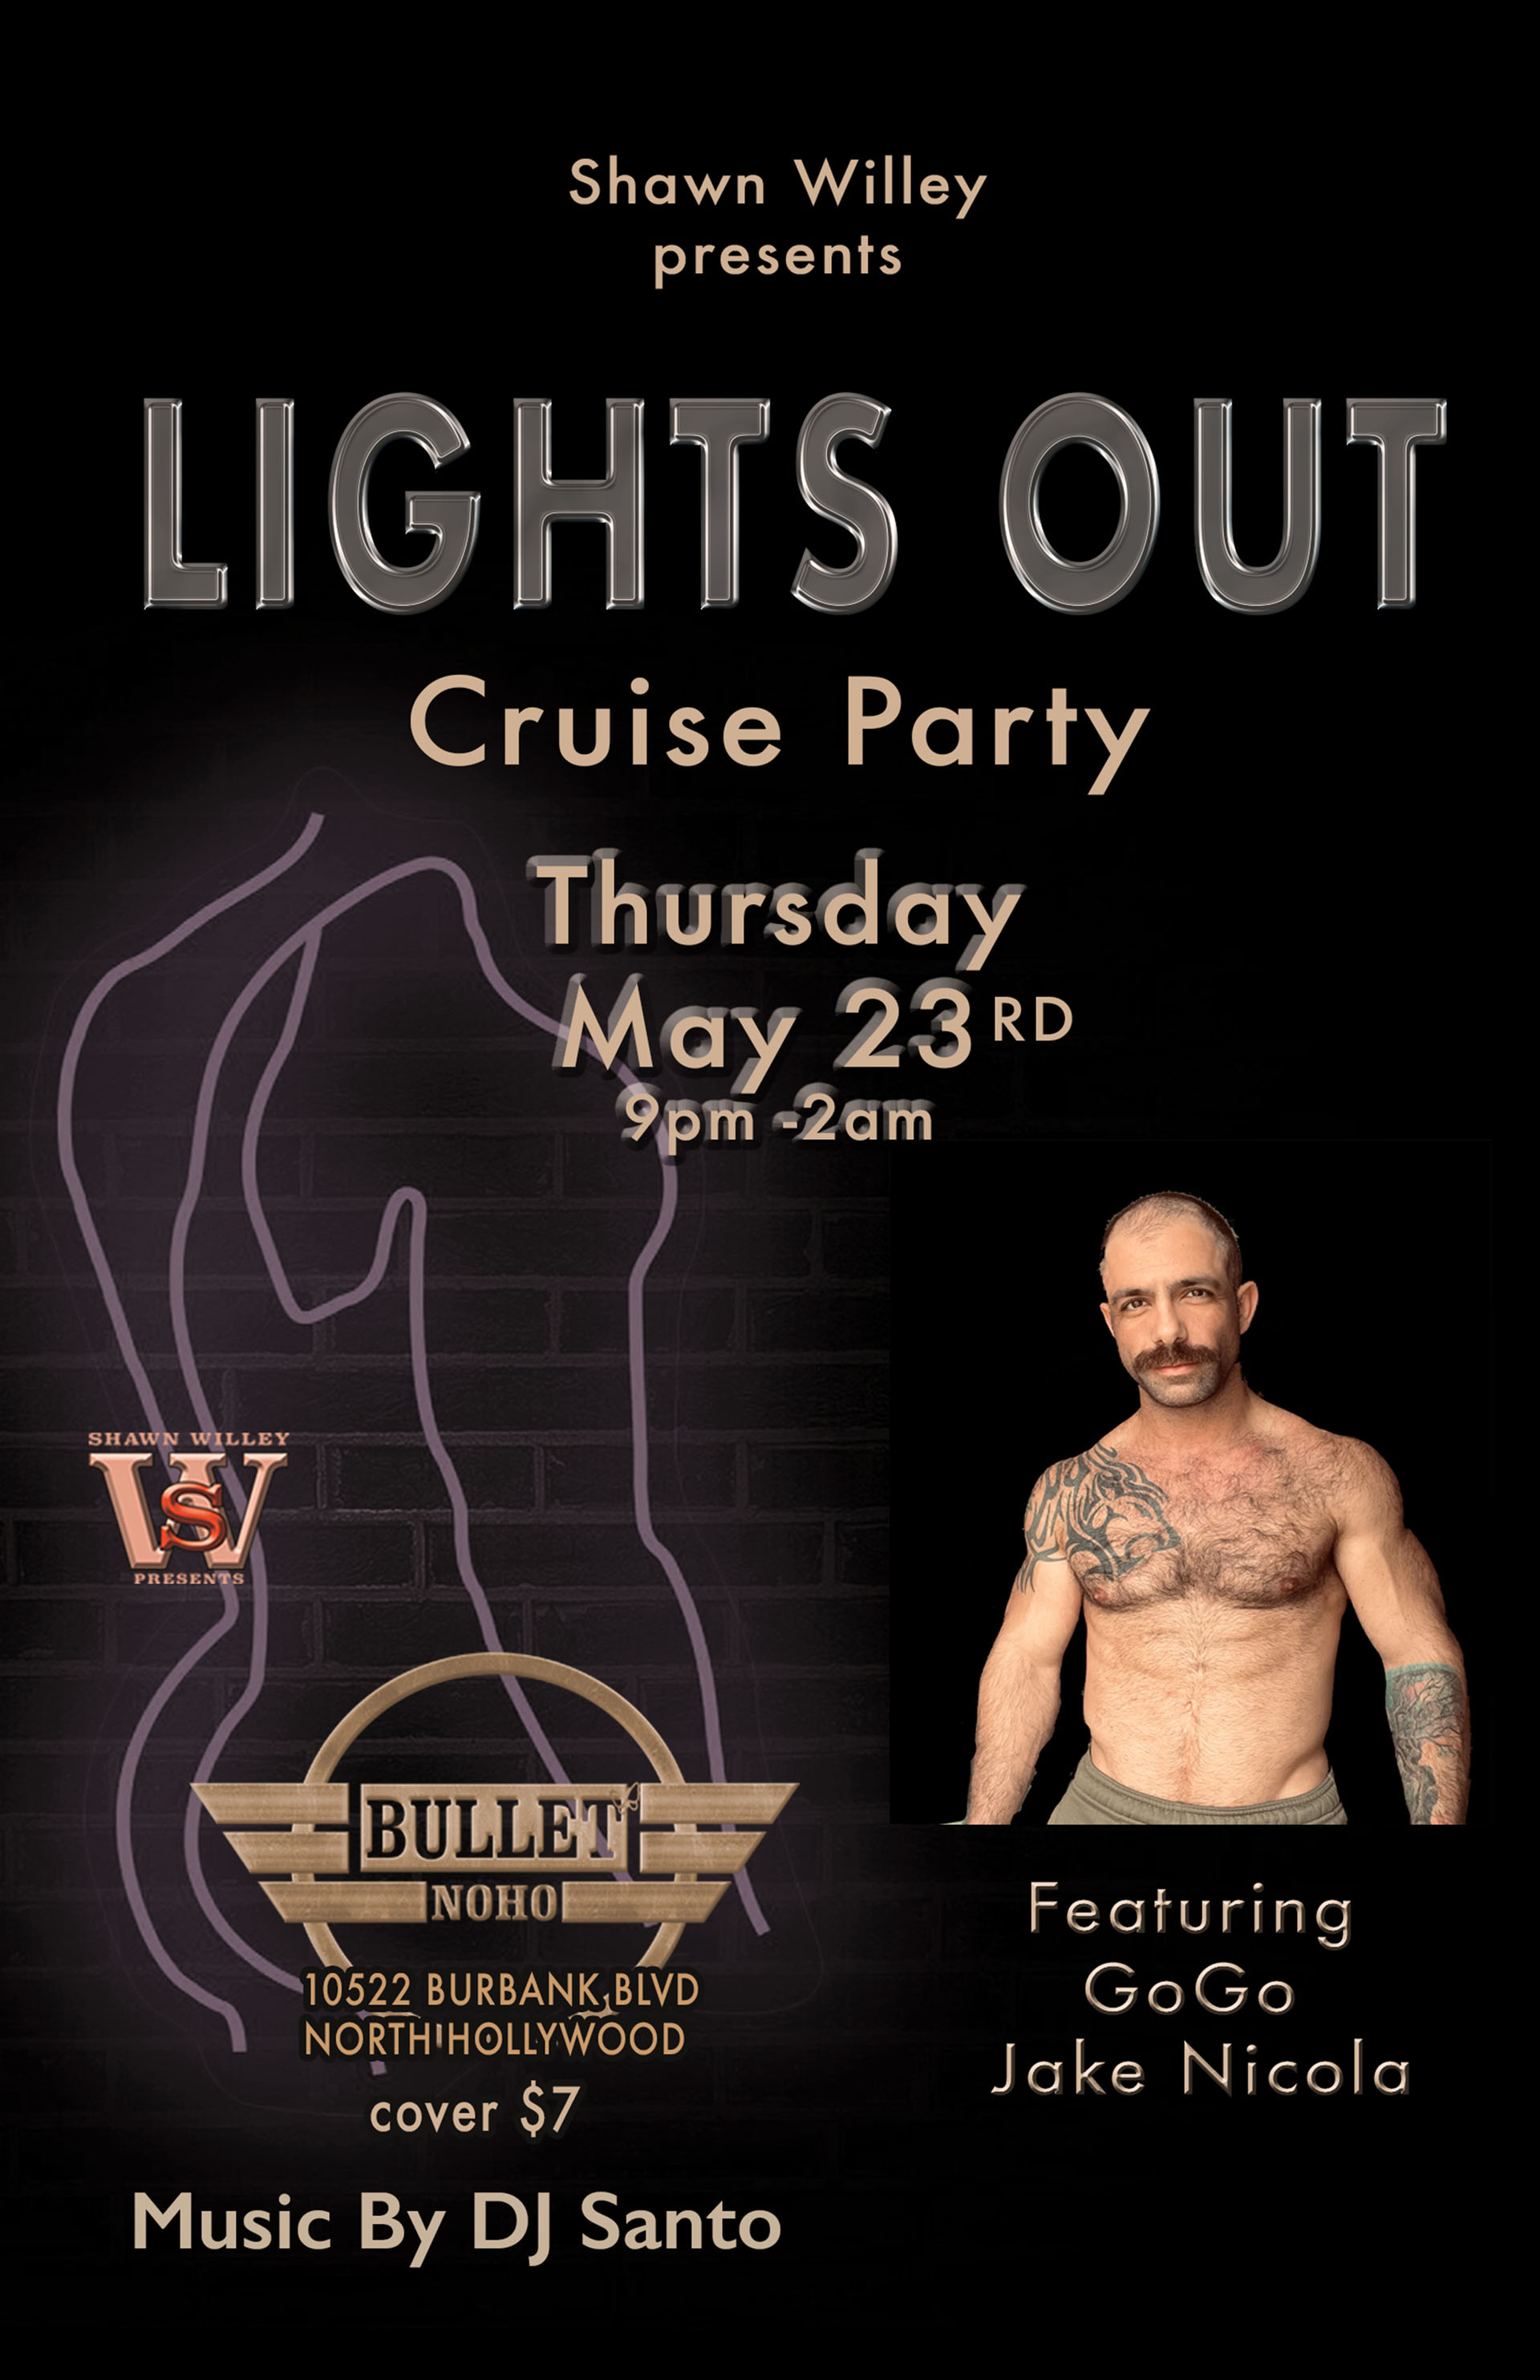 THE BULLET BAR Presents SHAWN WILLEY'S LIGHTS OUT CRUISE PARTY: Thursday, 05/23/24, 9:00 PM to 2:00 AM. Featuring DJ SANTO and GoGo JAKE NICOLA. $7 cover.